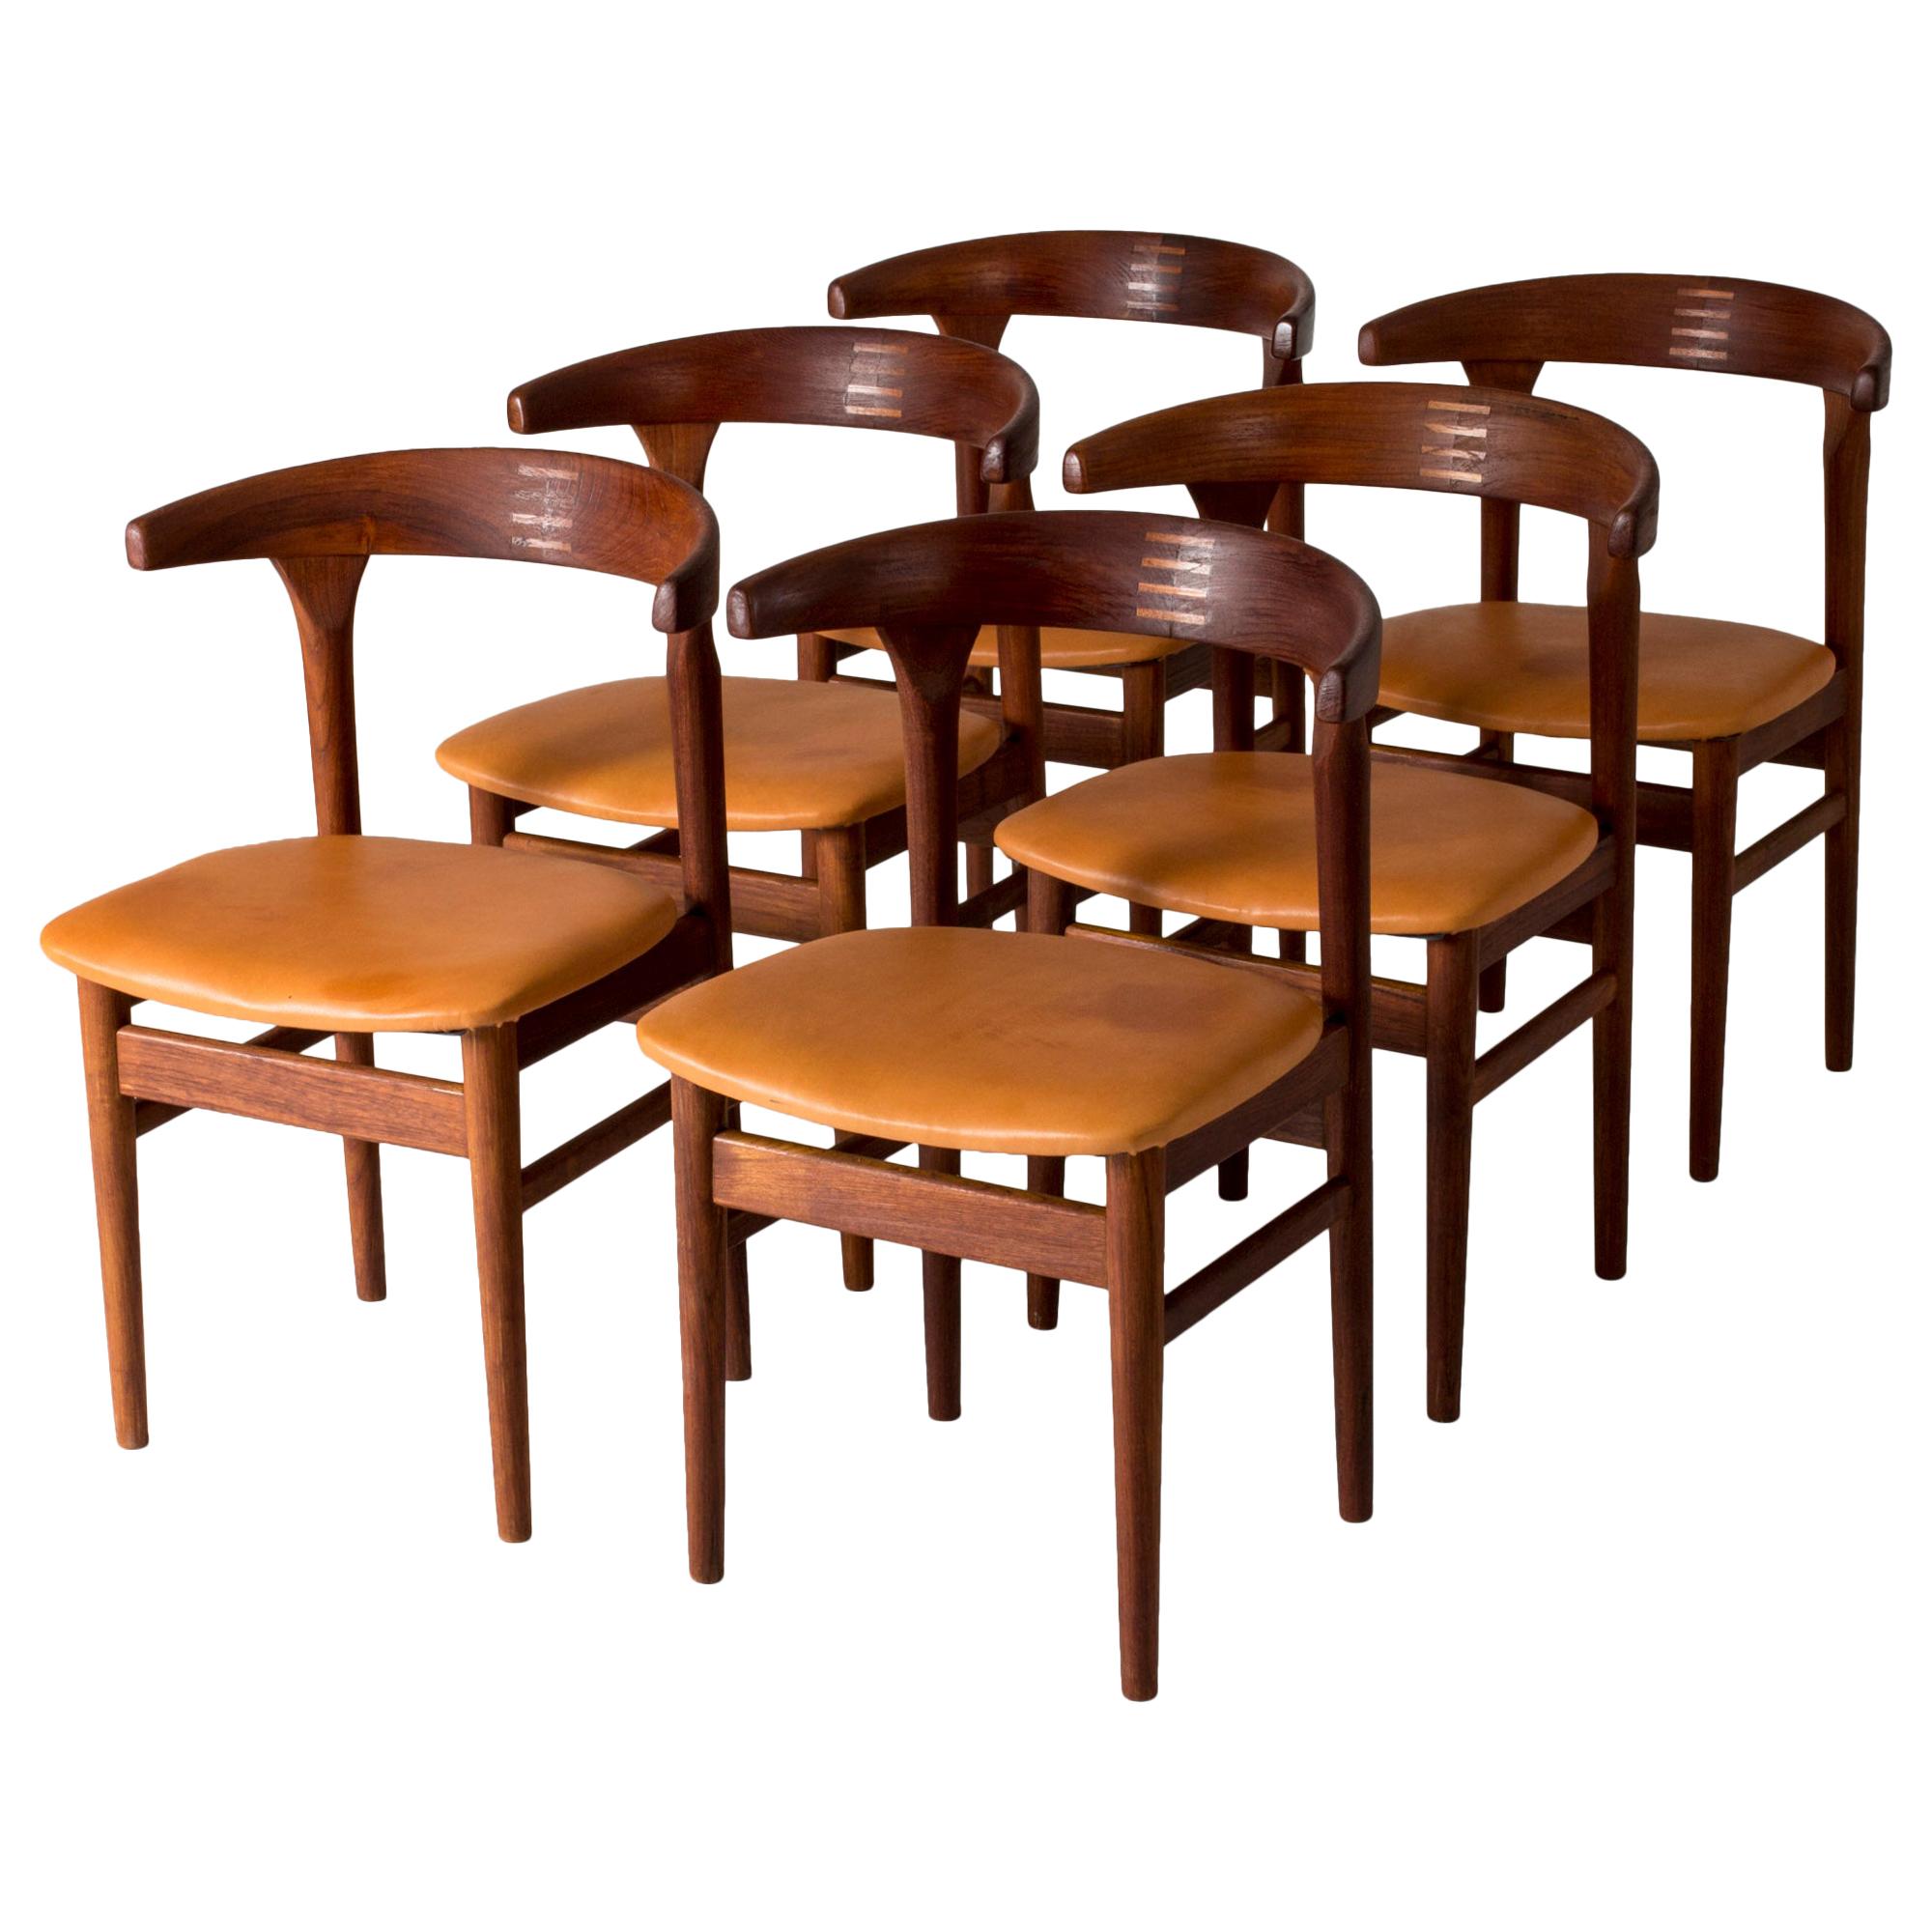 Set of Six "Cowhorn" Chairs by Torbjørn Afdal